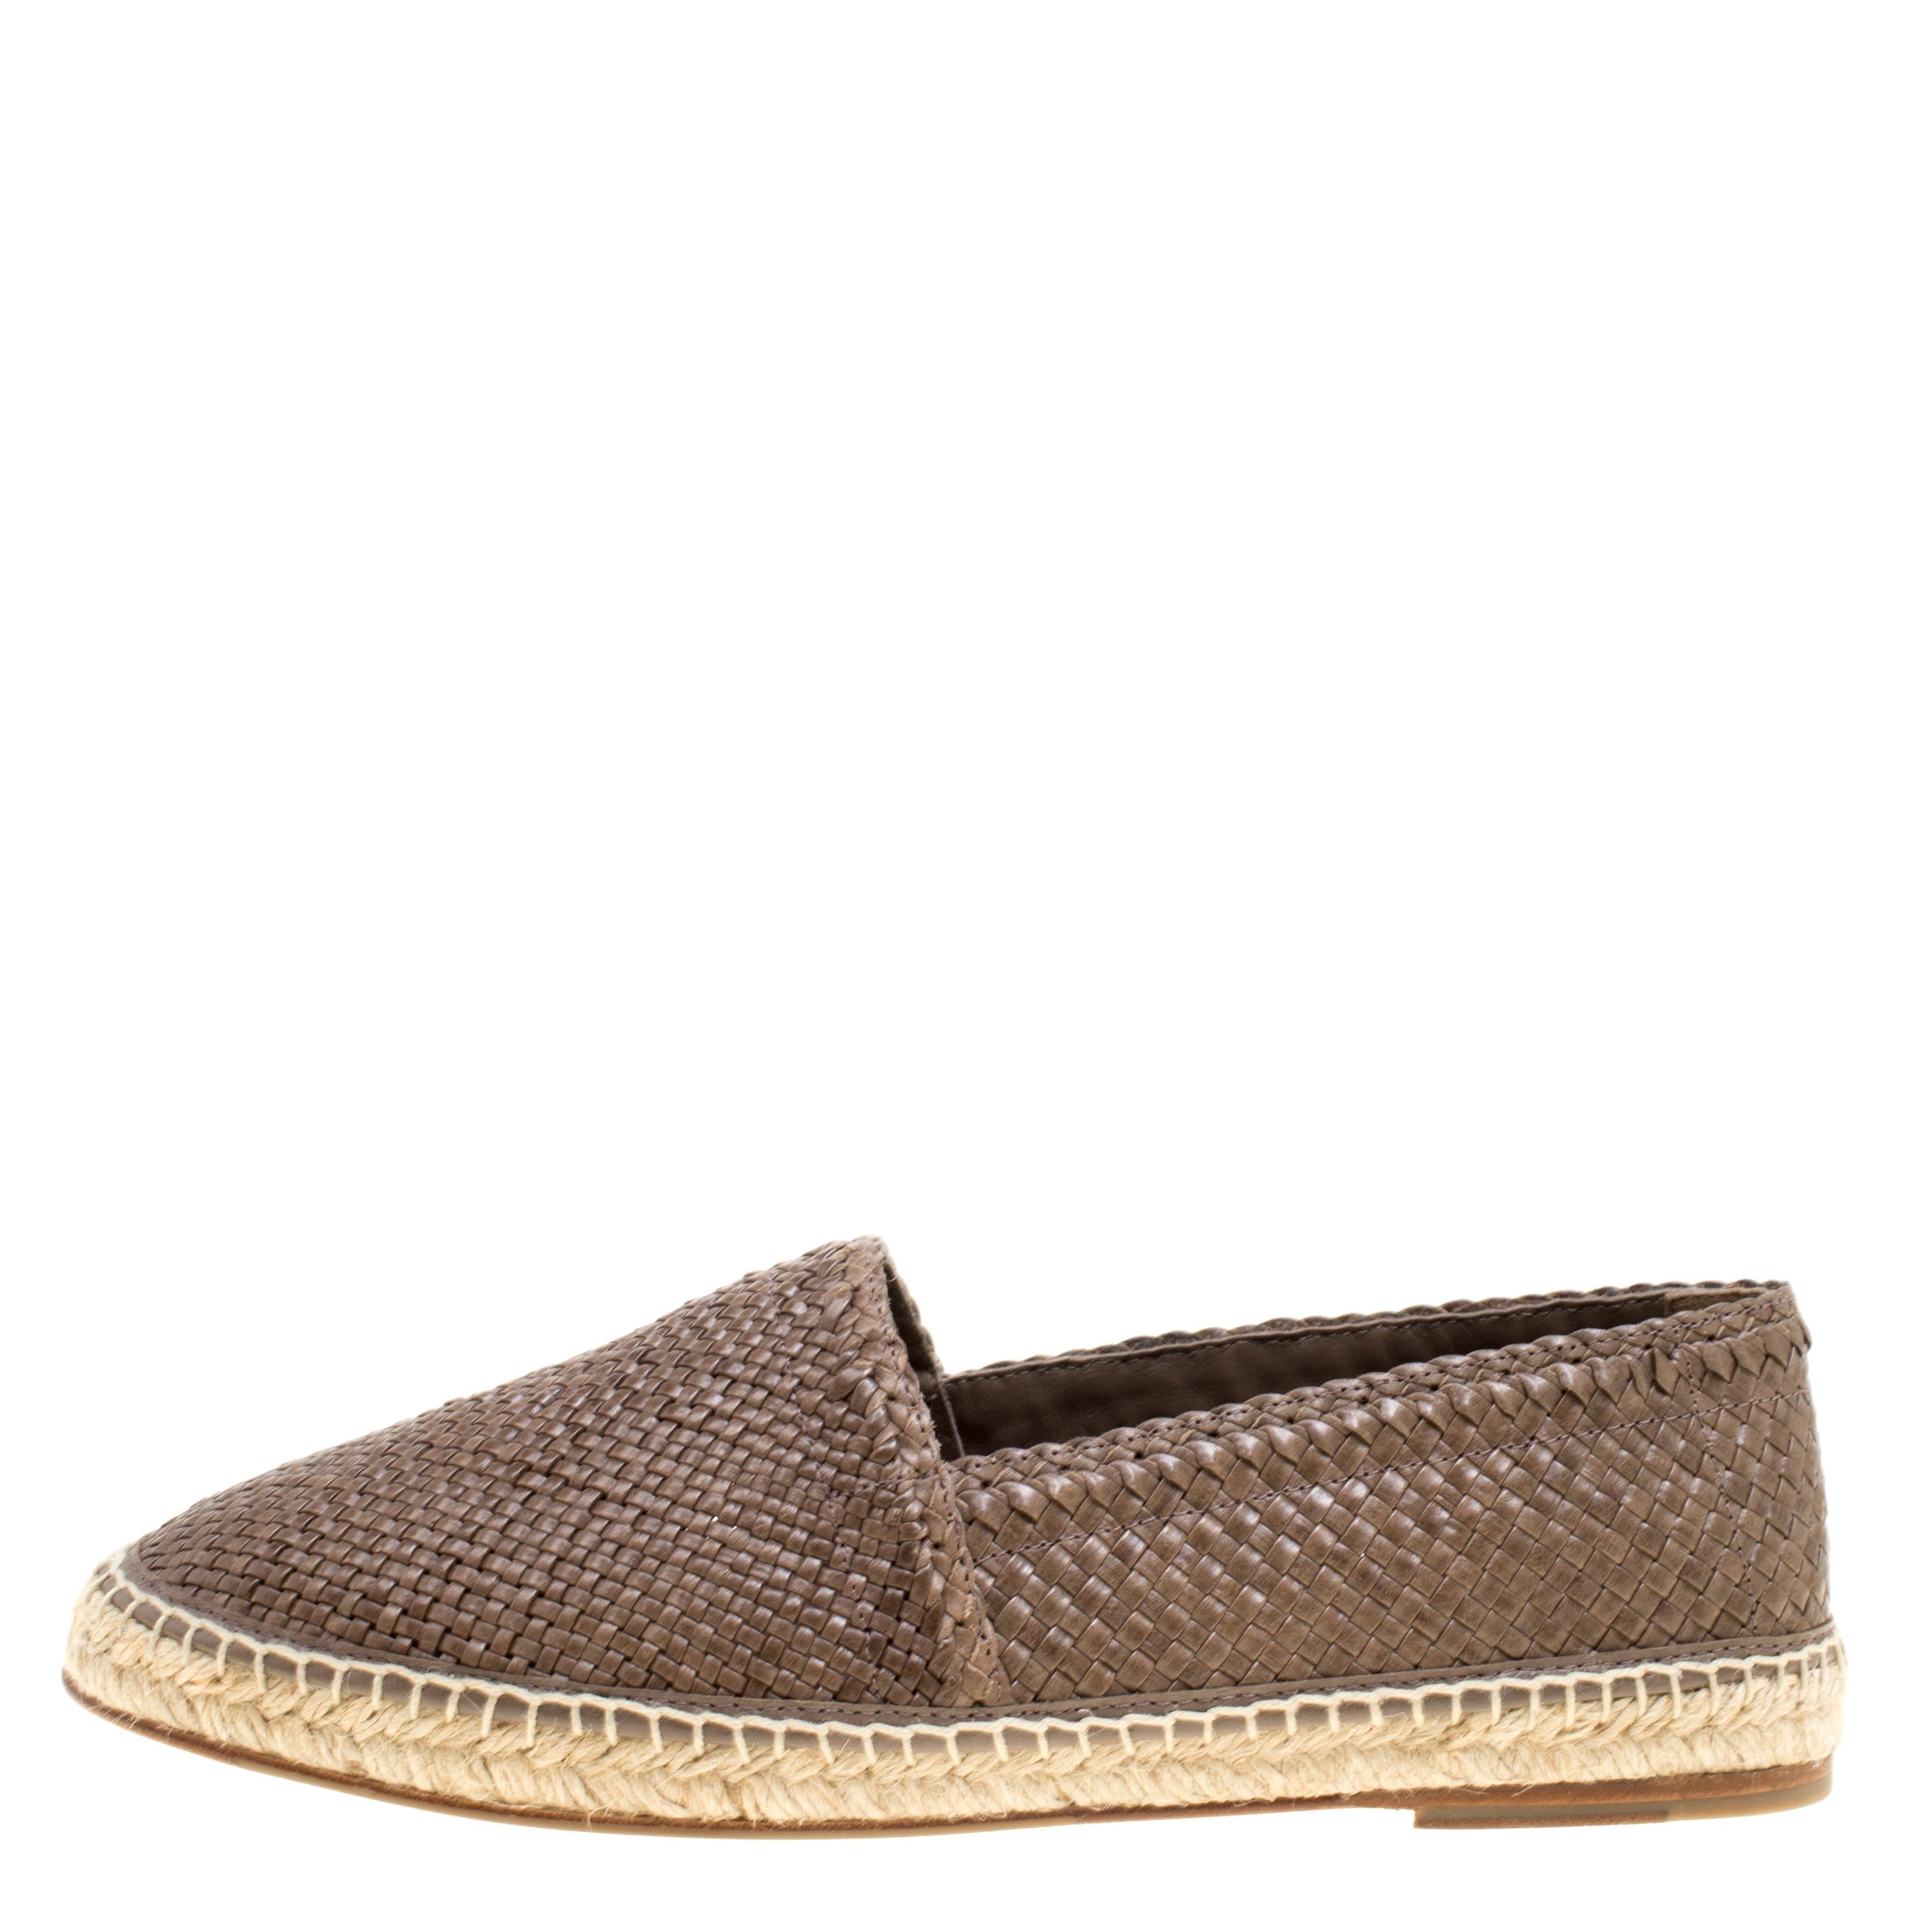 Espadrilles are not just stylish, but also comfortable and easy to wear. This lovely pair of Dolce & Gabbana espadrilles will accompany a casual outfit with perfection. They have been formed by braiding brown leather and finishing them with braided